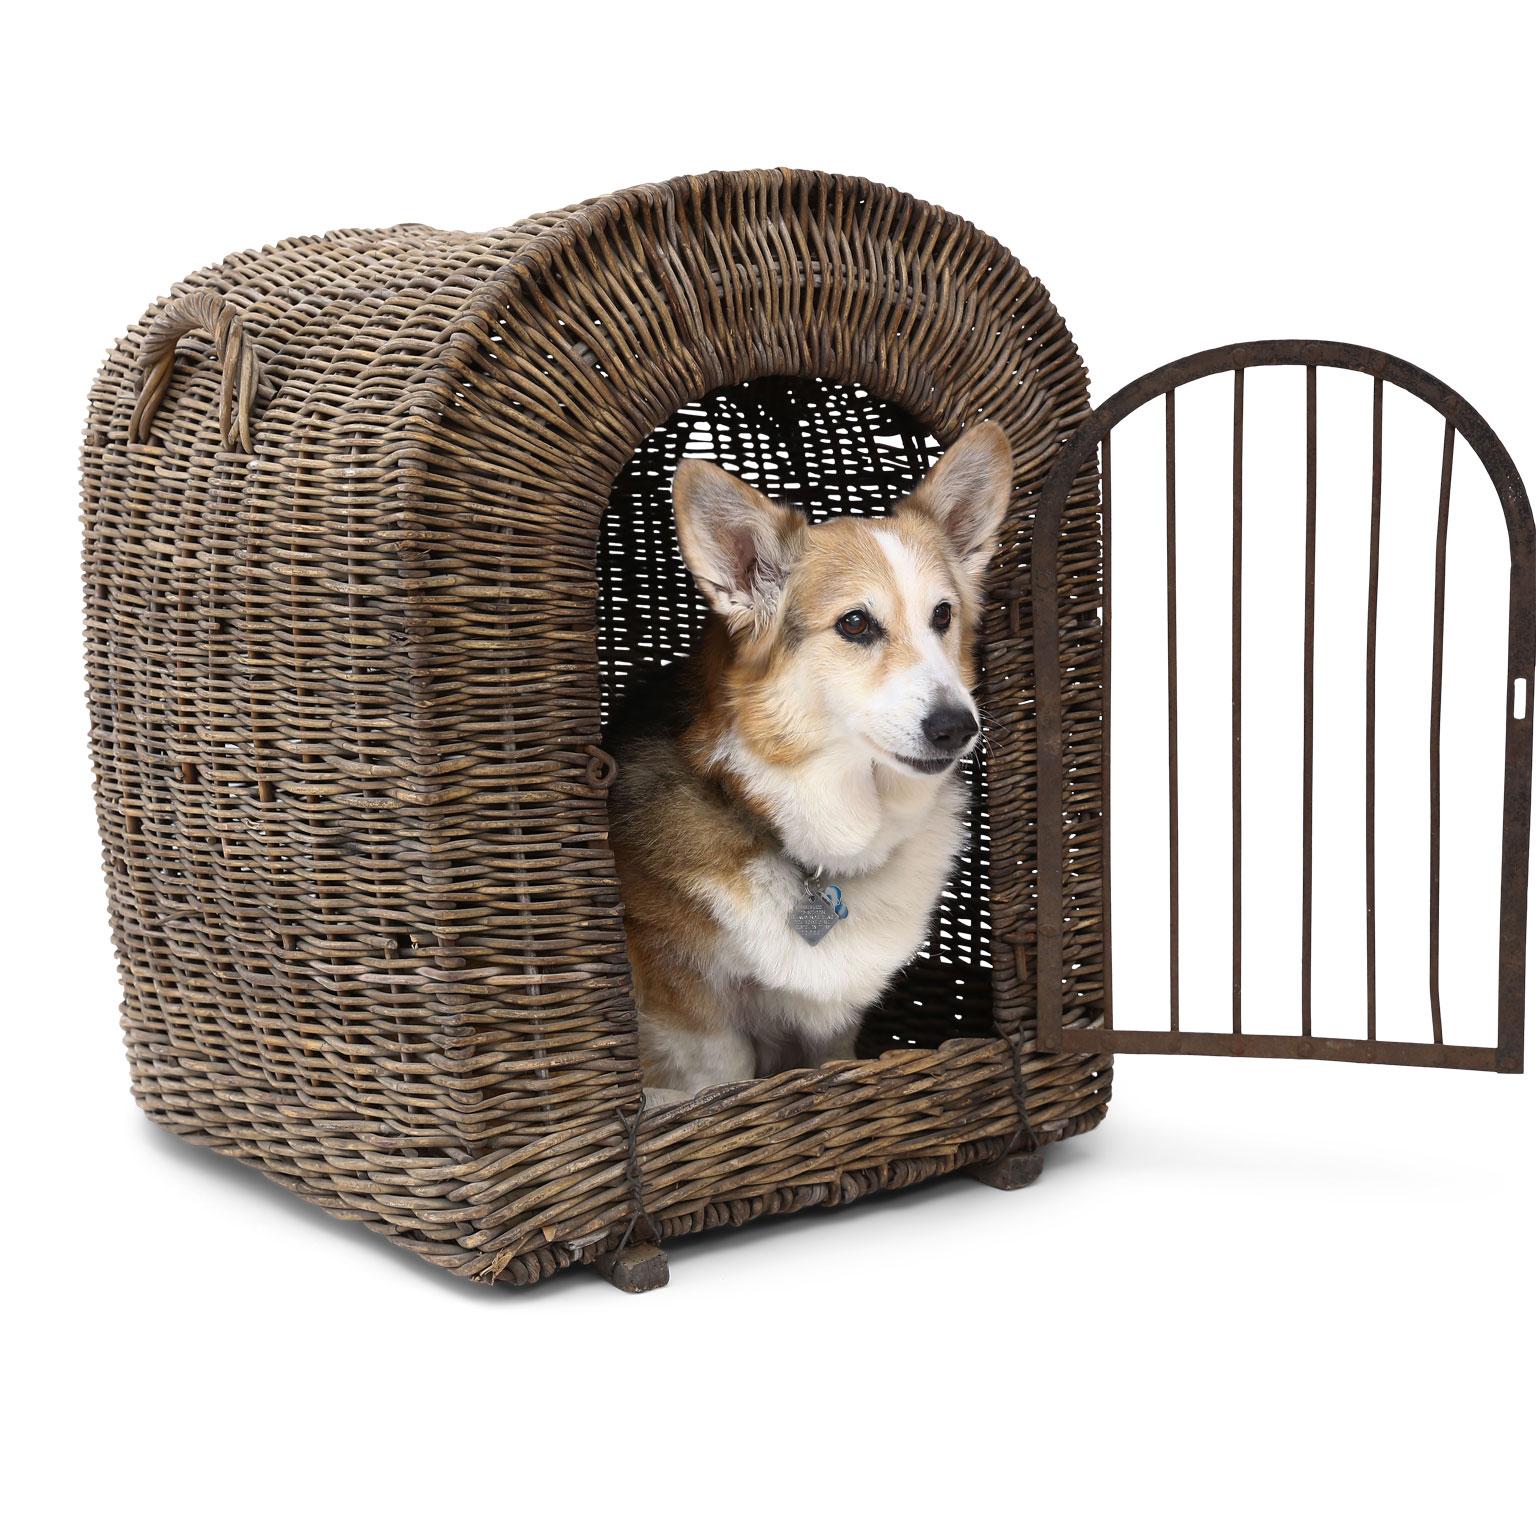 English brown wicker dog kennel or pet carrier (circa 1900-1910), rare large-scale and in good condition. Forged iron door and latch loop. Door opening measures: 18.5 inches high x 12.5 inches wide. Corgi not included.

Note: Original/early finish